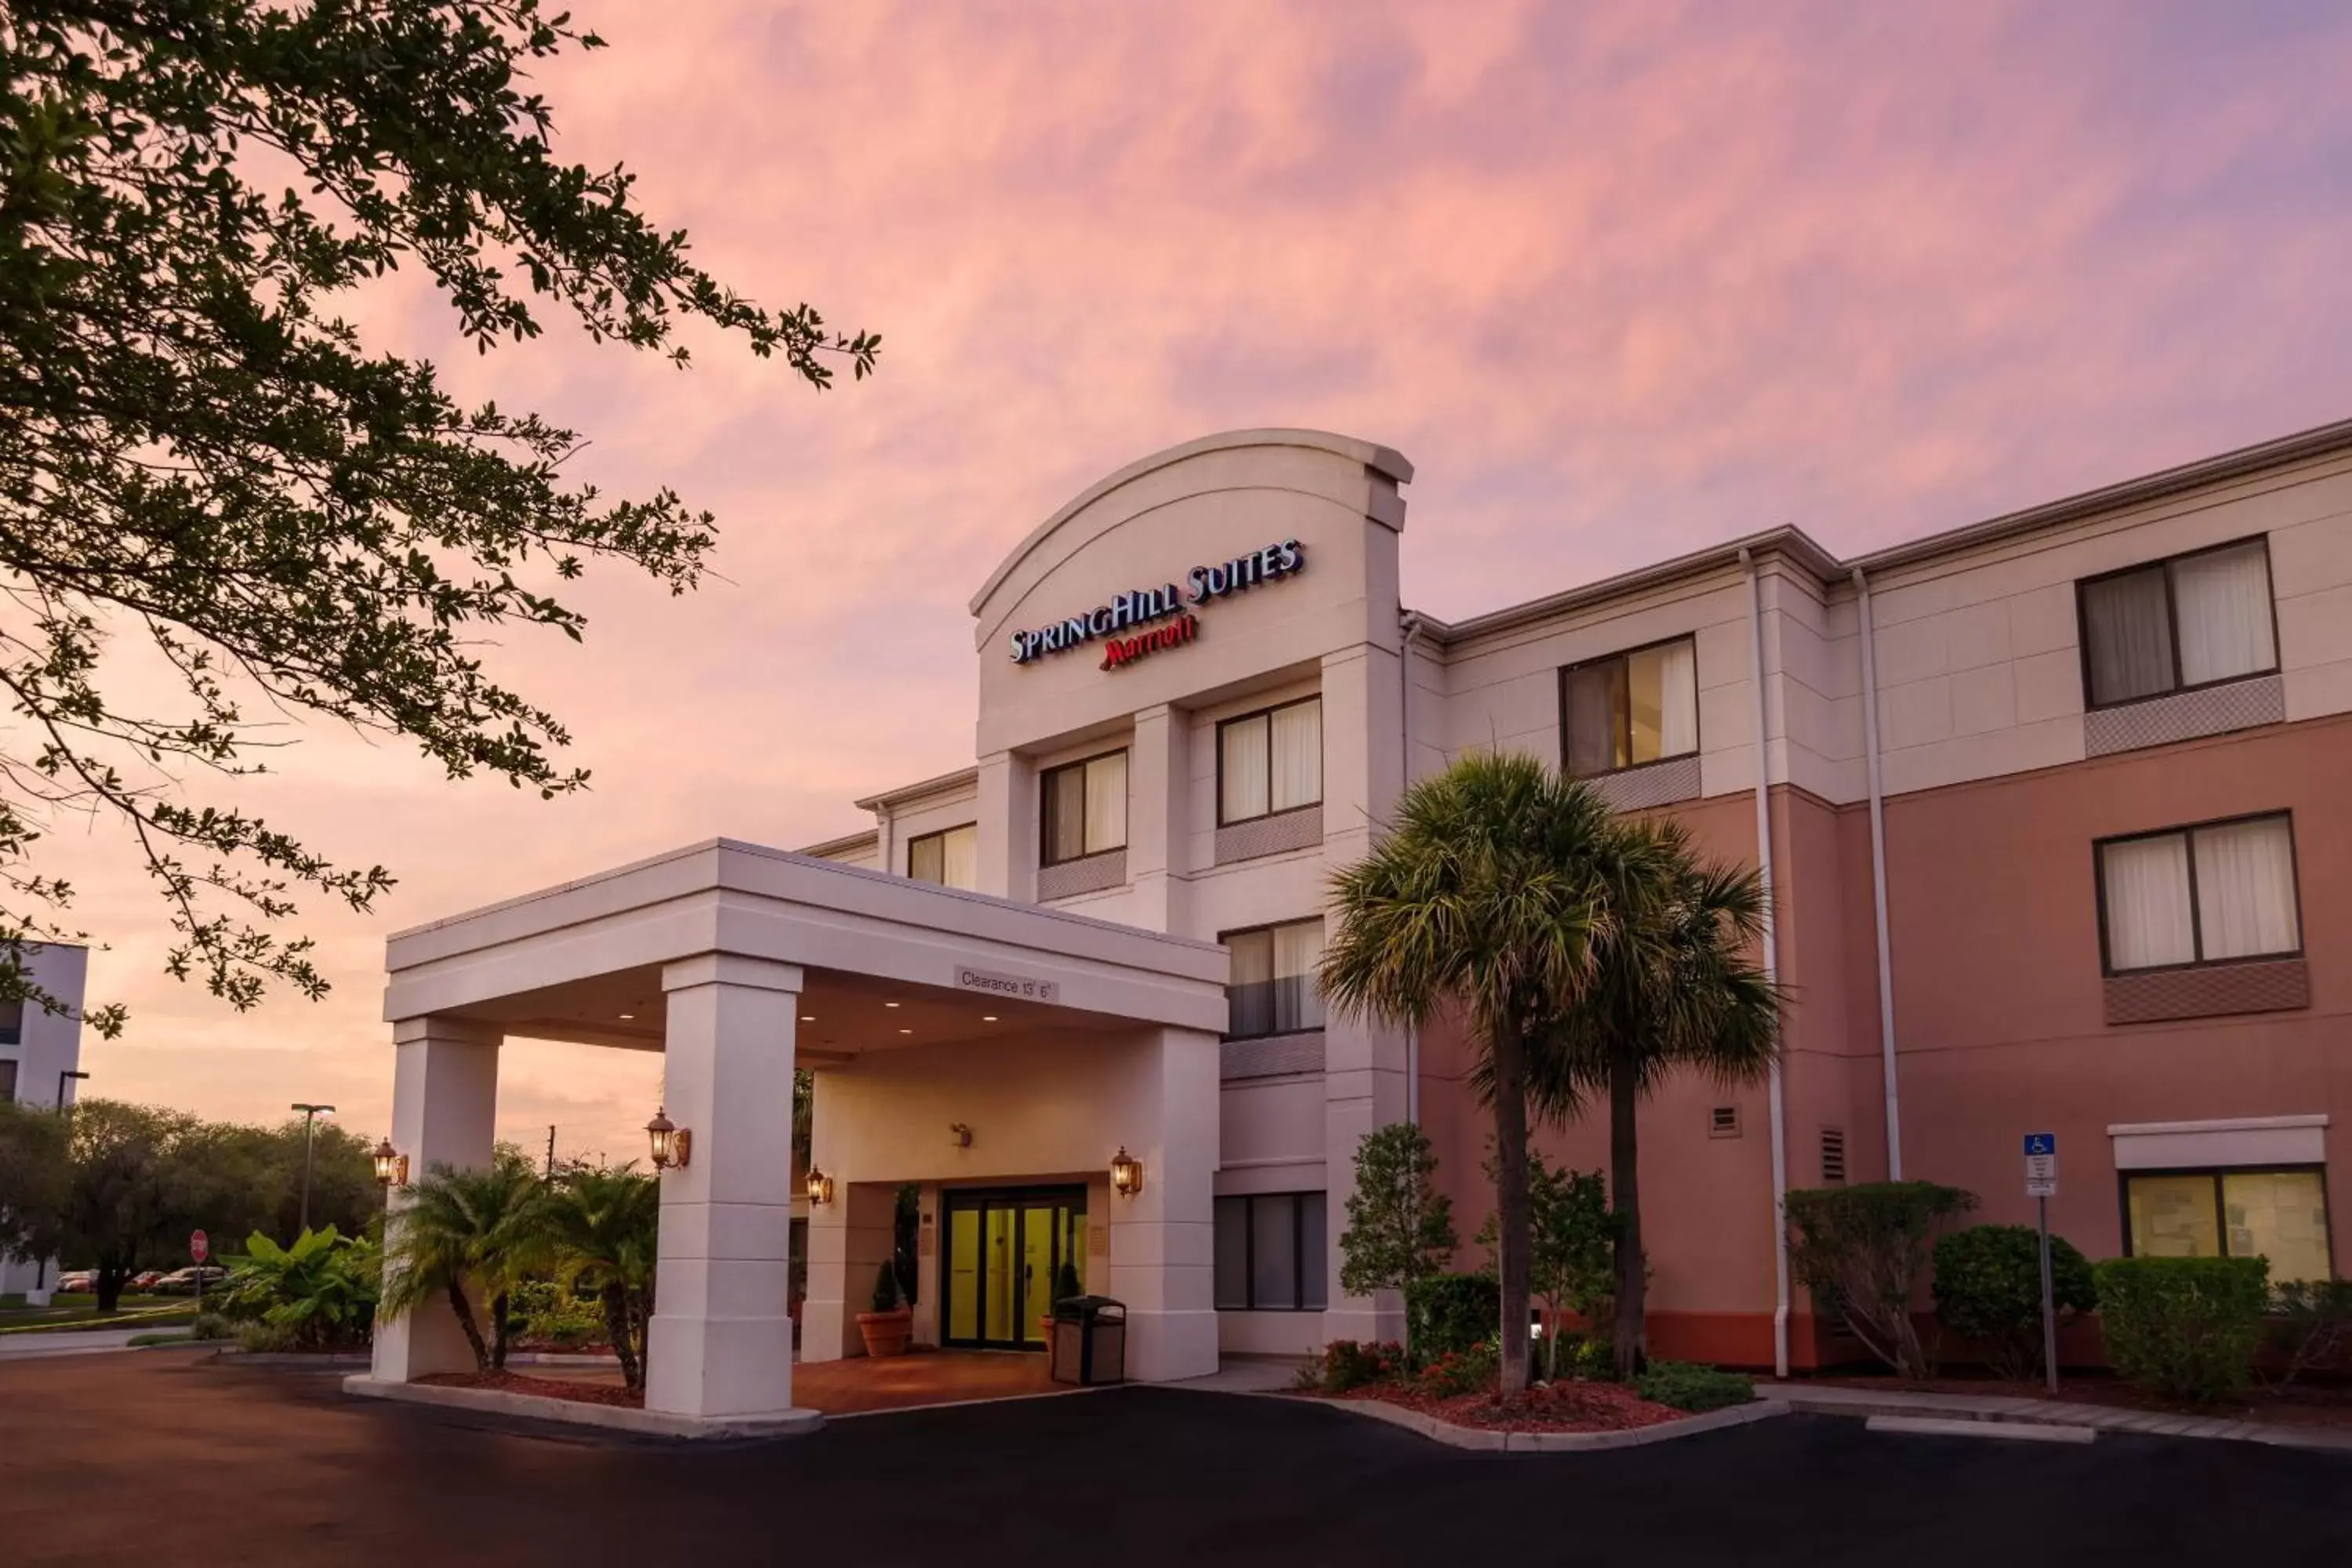 Property Building in SpringHill Suites St Petersburg Clearwater